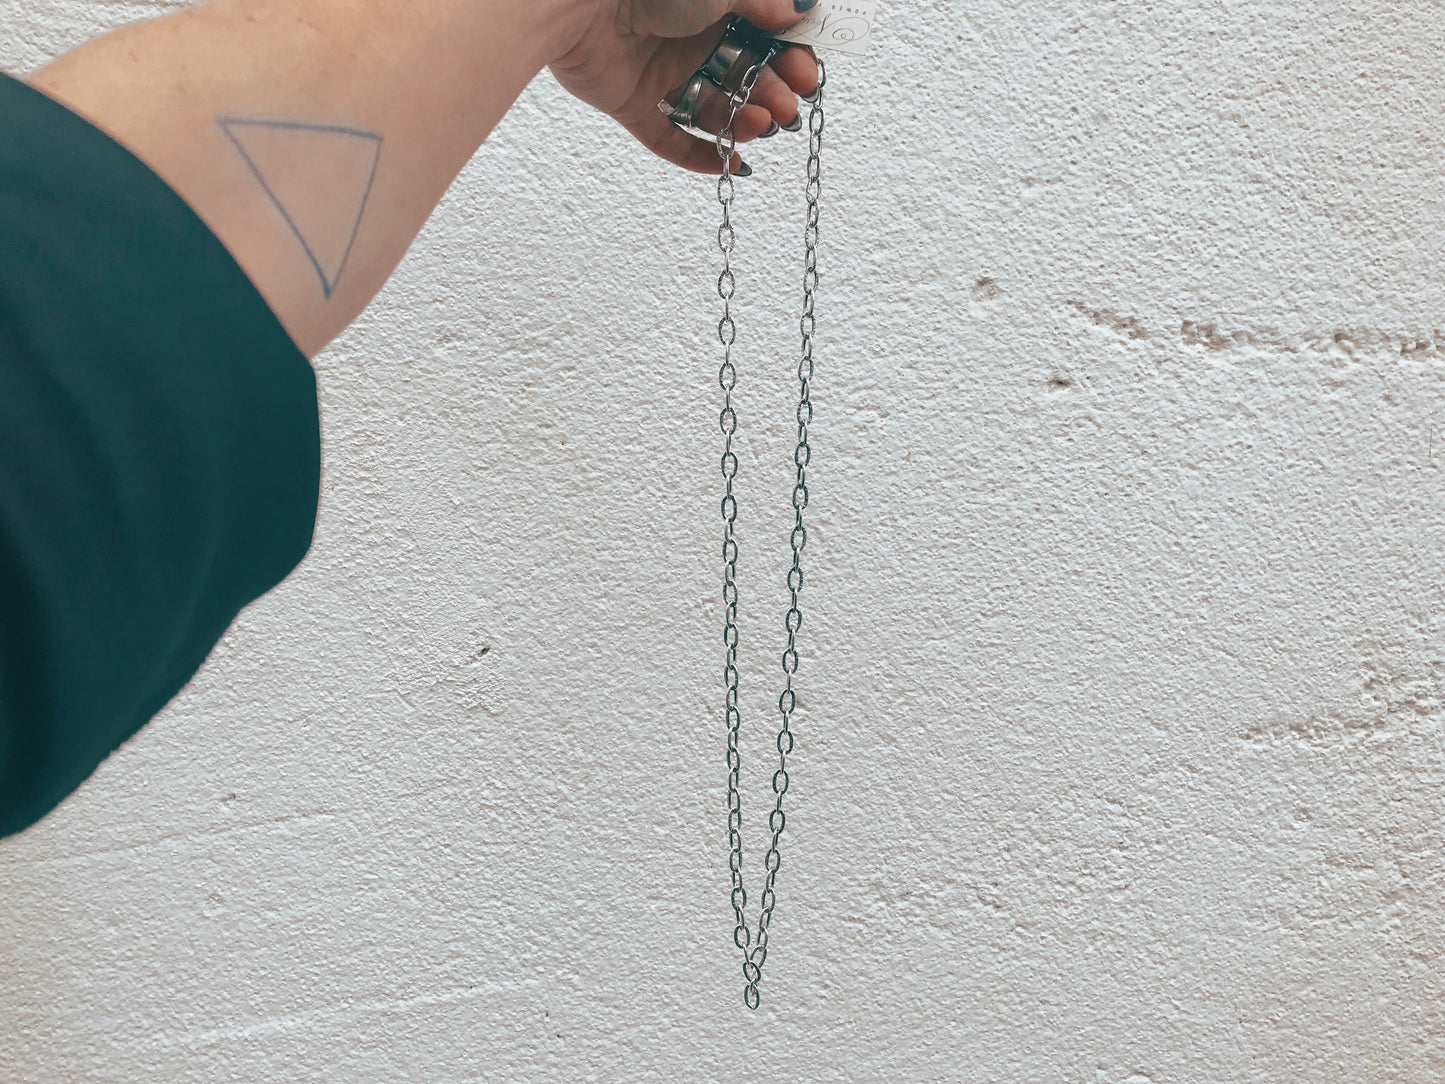 30" Large Link Sterling Silver Chain